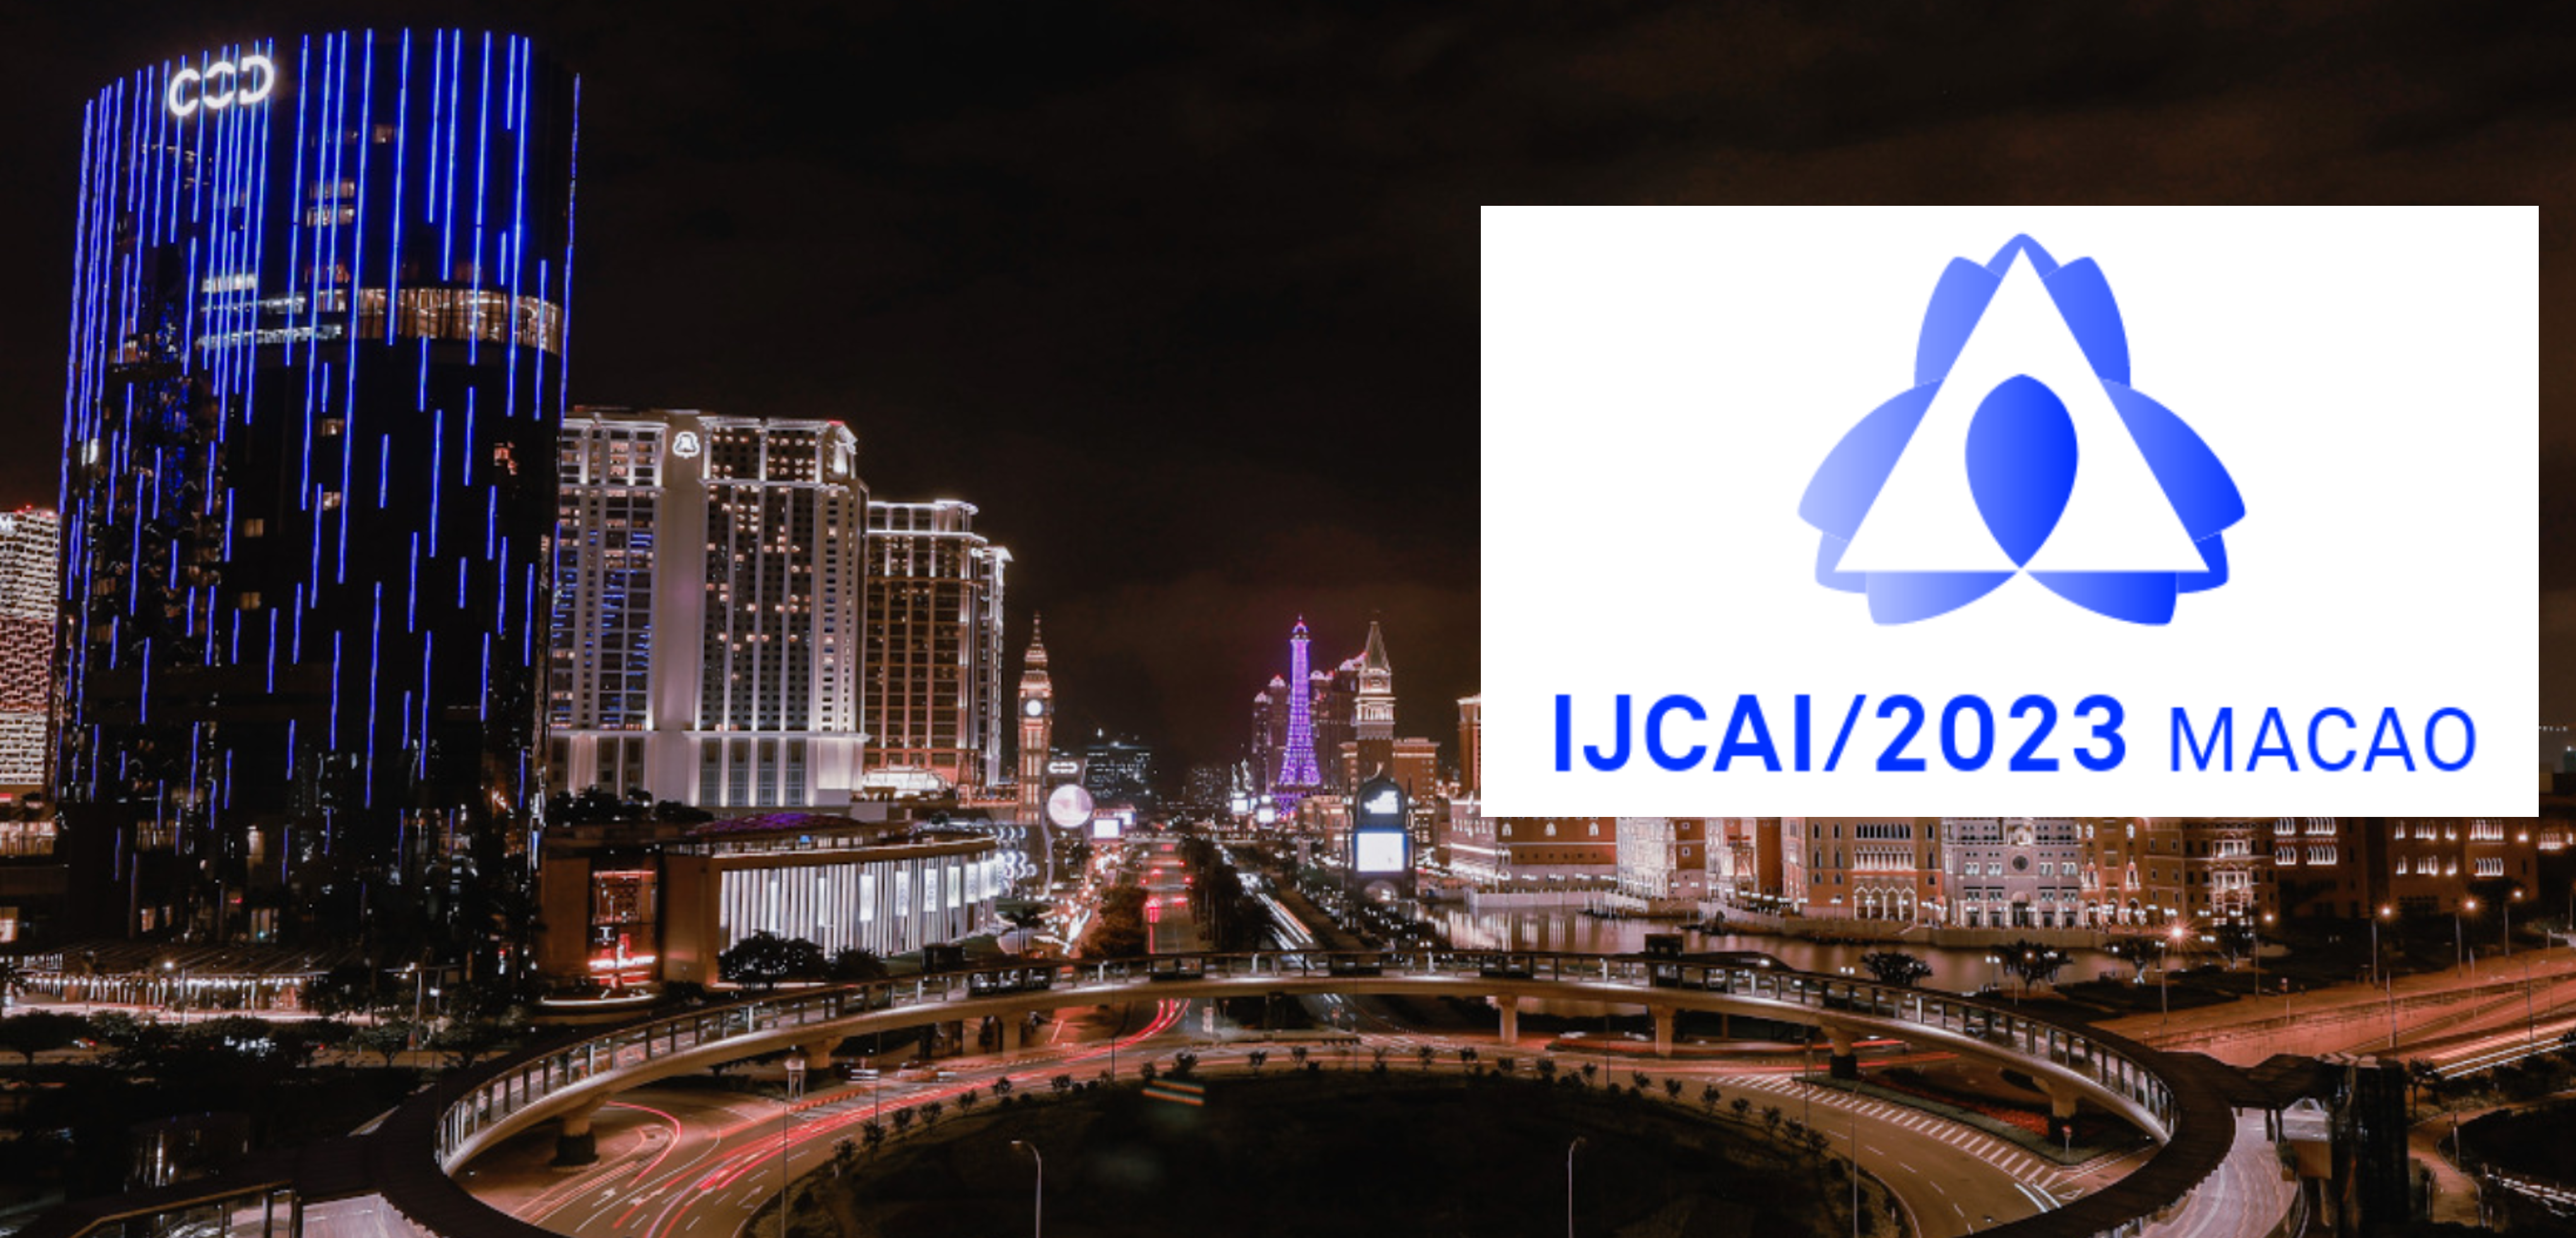 IJCAI 2023 logo with backdrop of Macao at nighttime